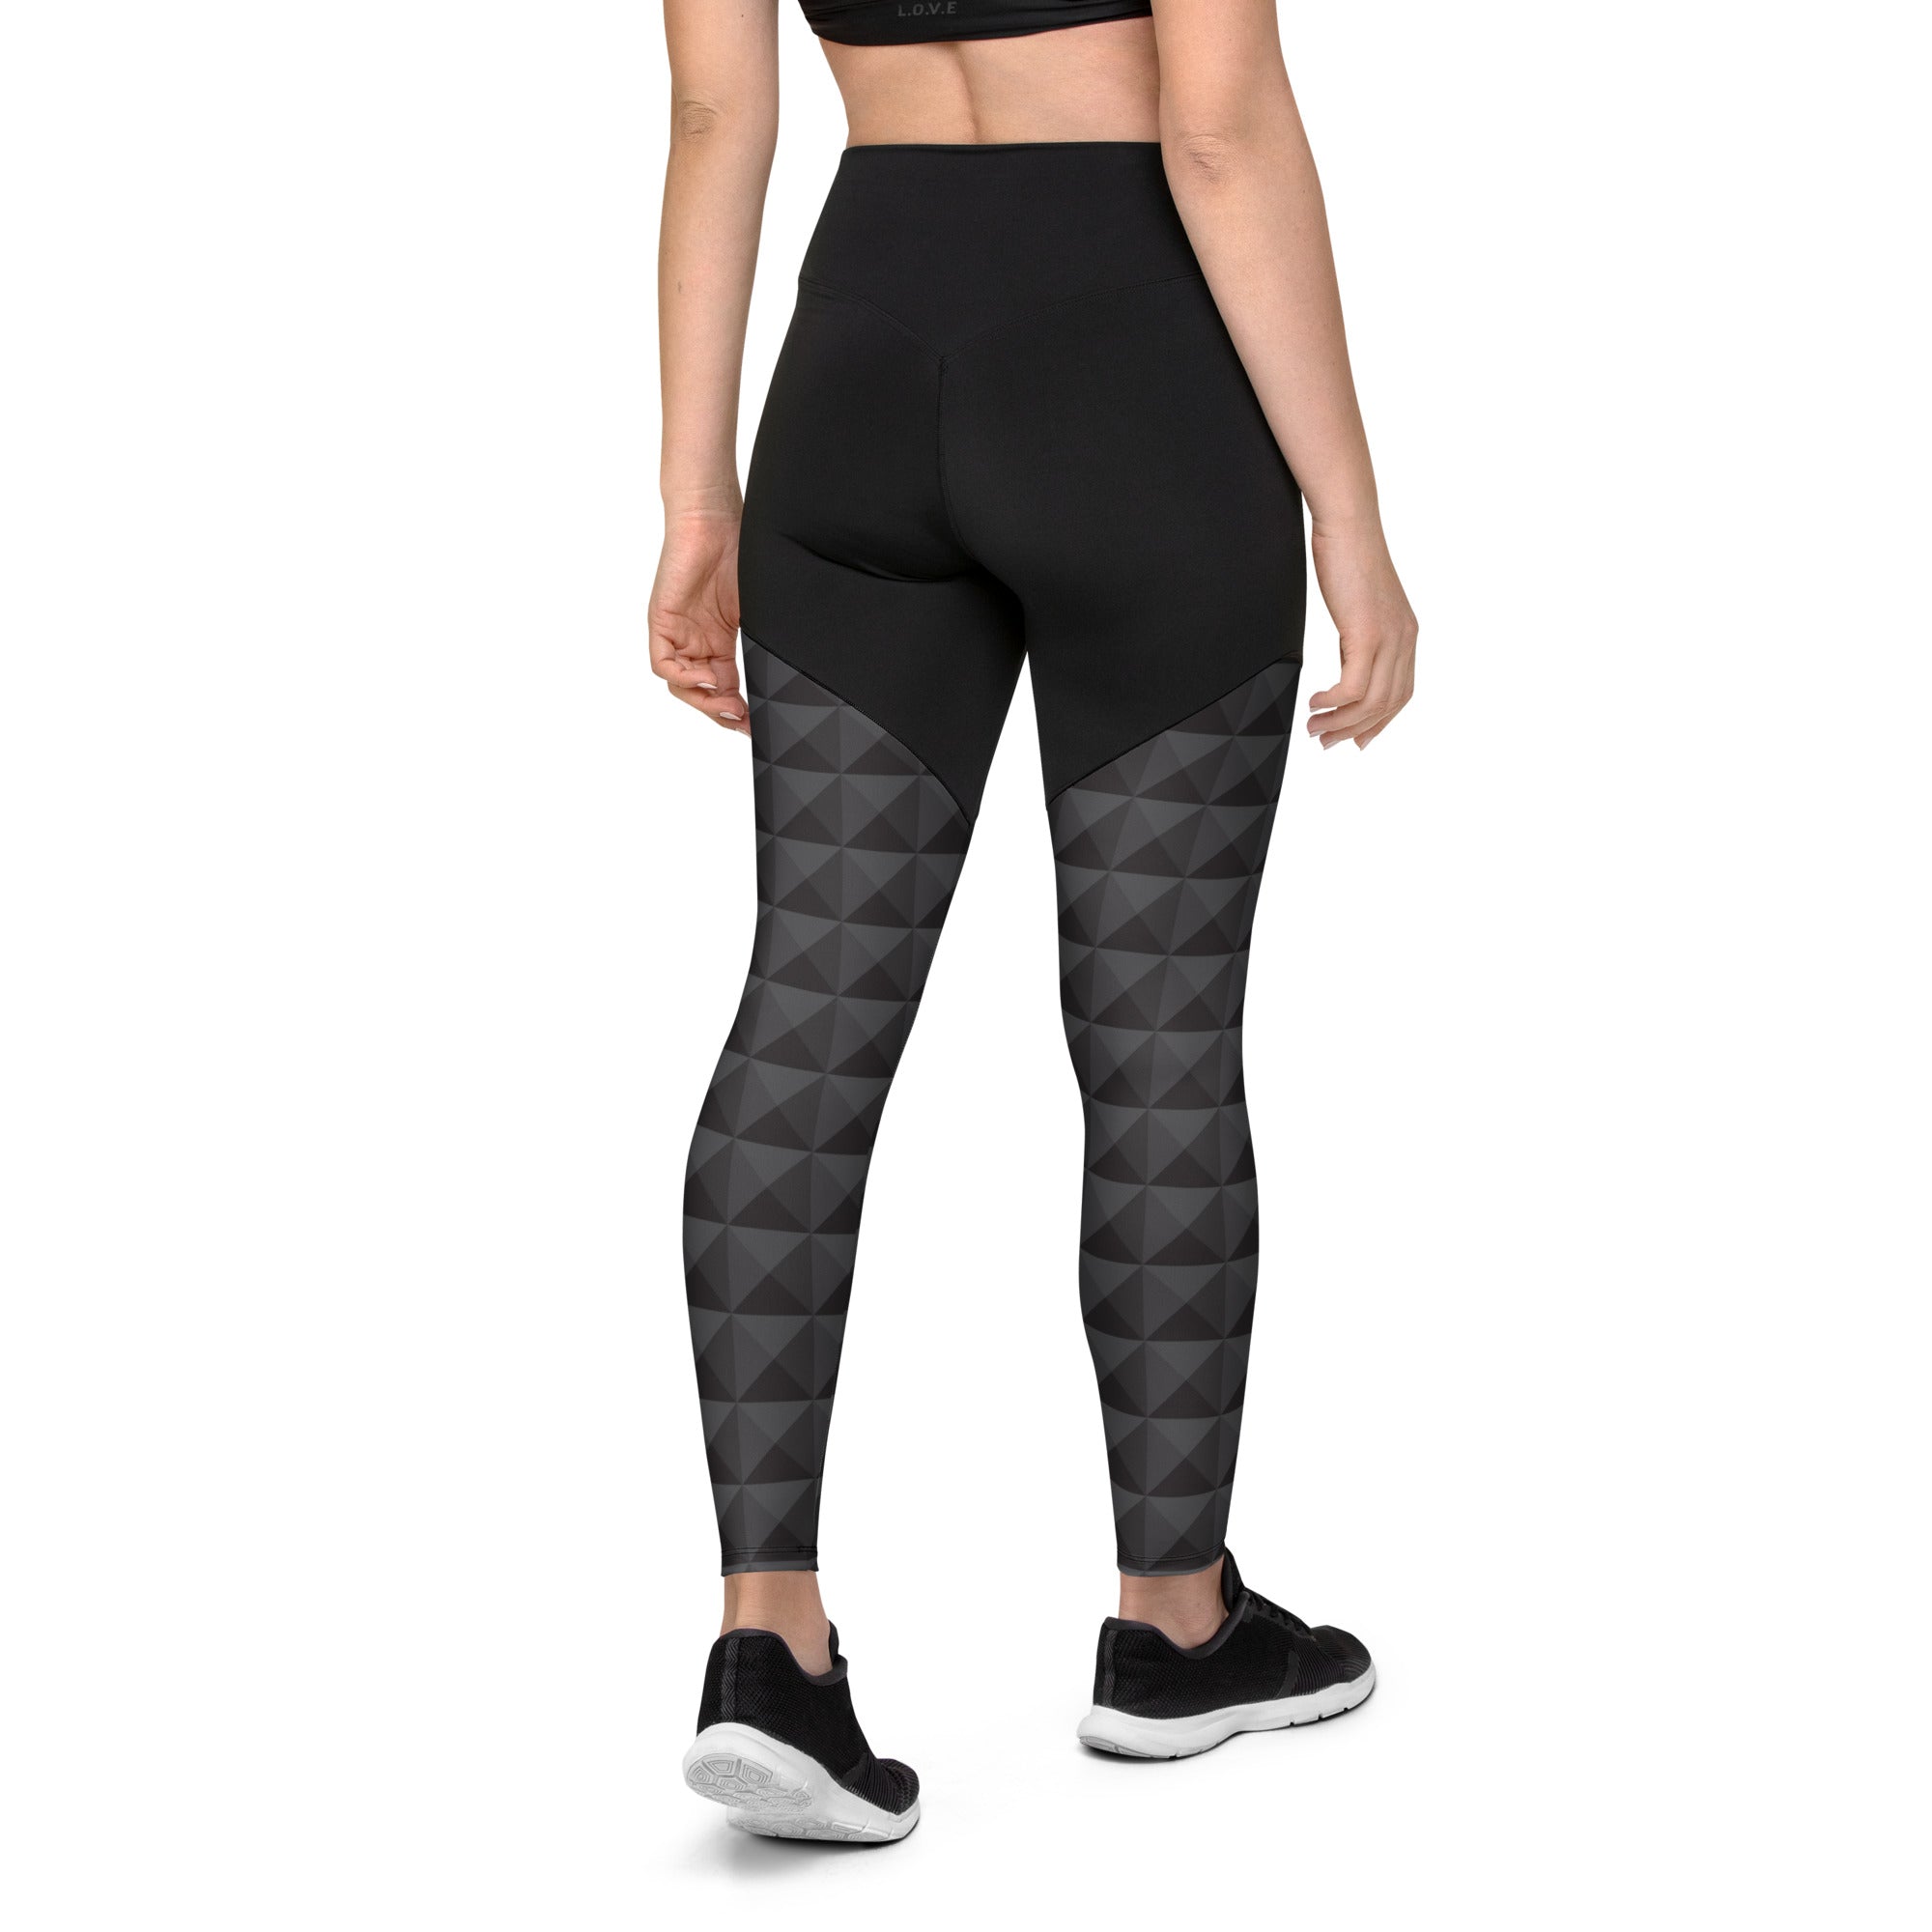 Seamless Cube Pattern Compression Leggings